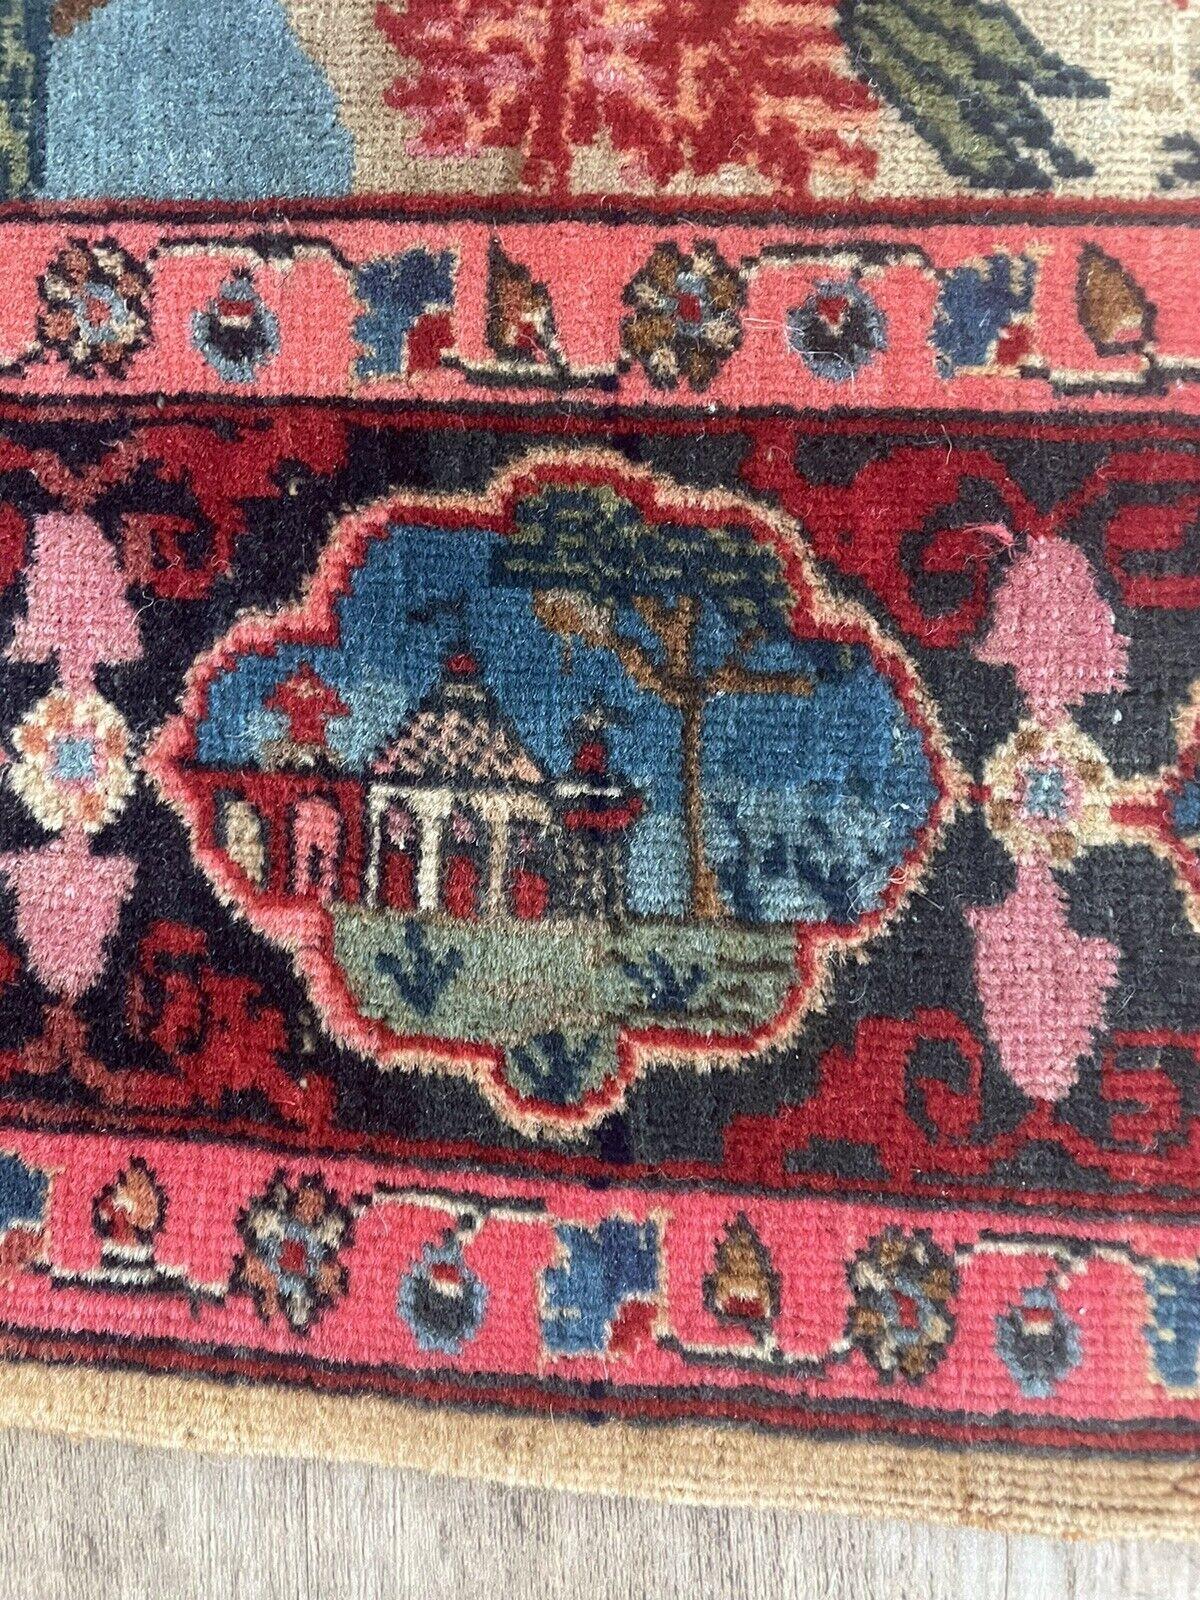 Handmade Antique Persian Kashan Collectible Rug 1.6' x 2.4, 1880s - 1N09 In Good Condition For Sale In Bordeaux, FR